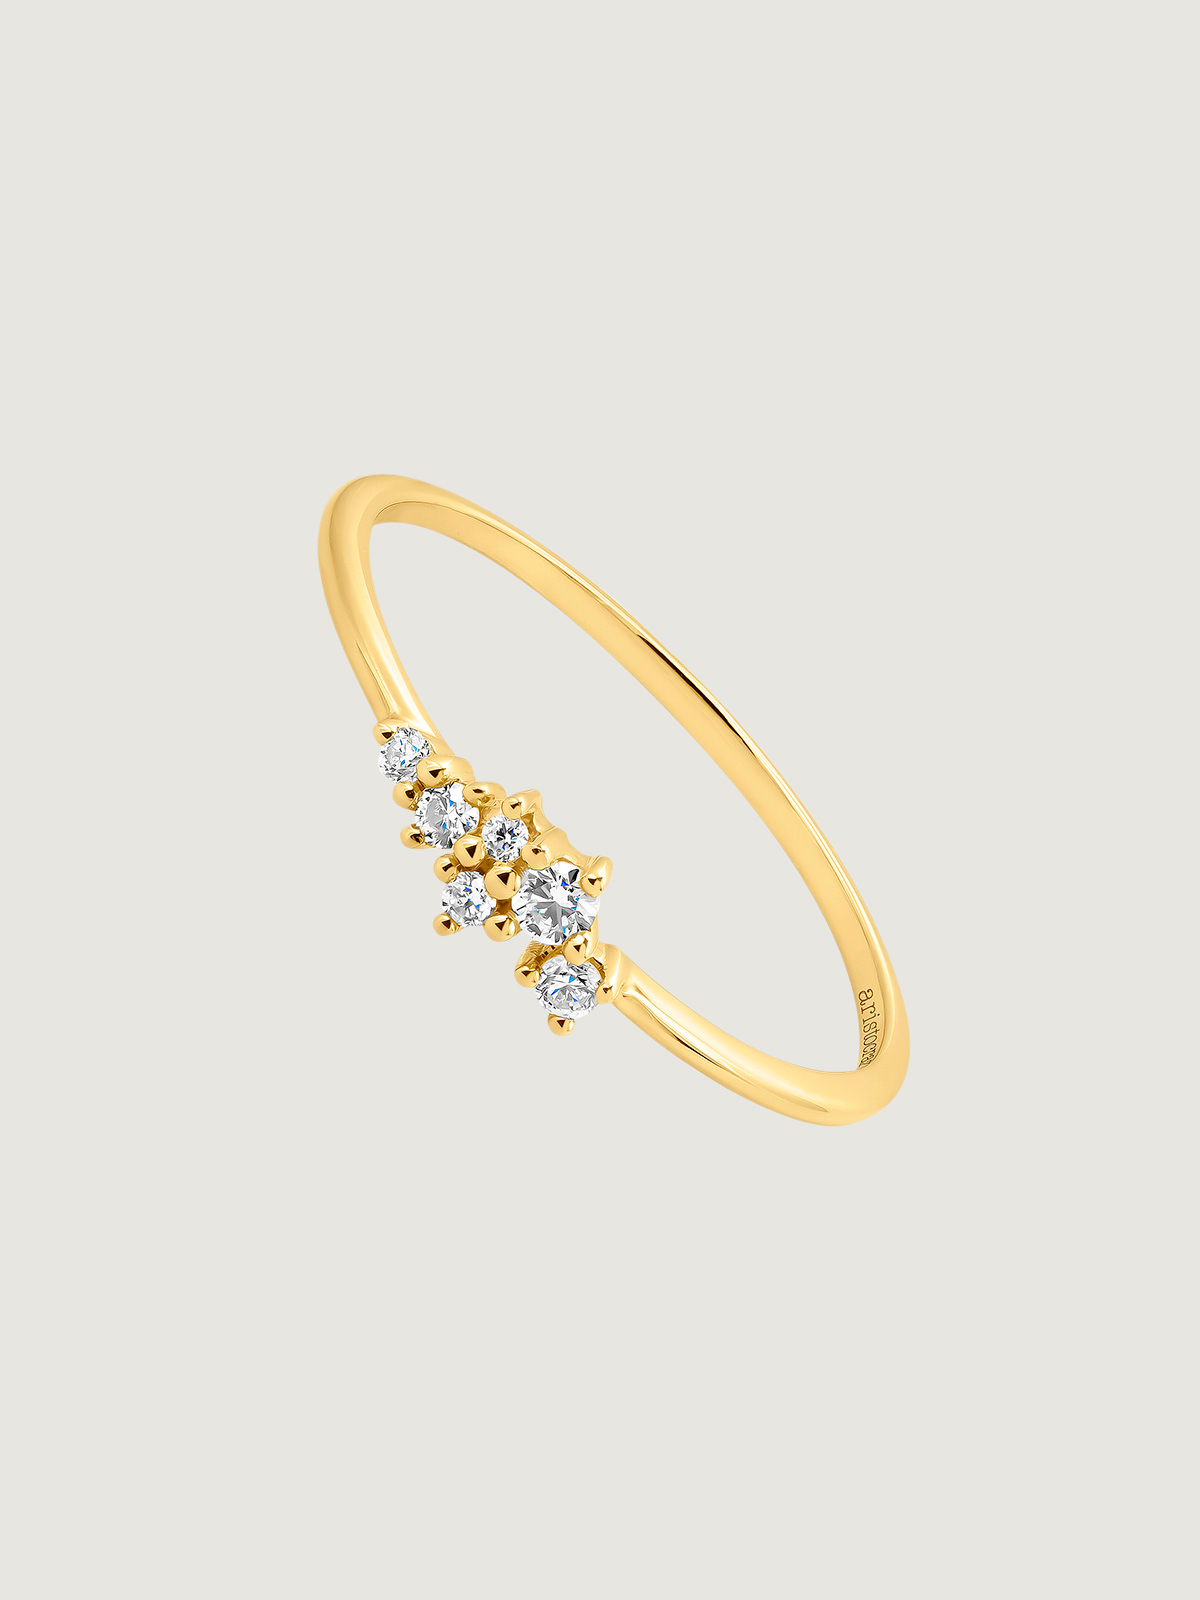 9K yellow gold ring with 0.025 cts diamonds